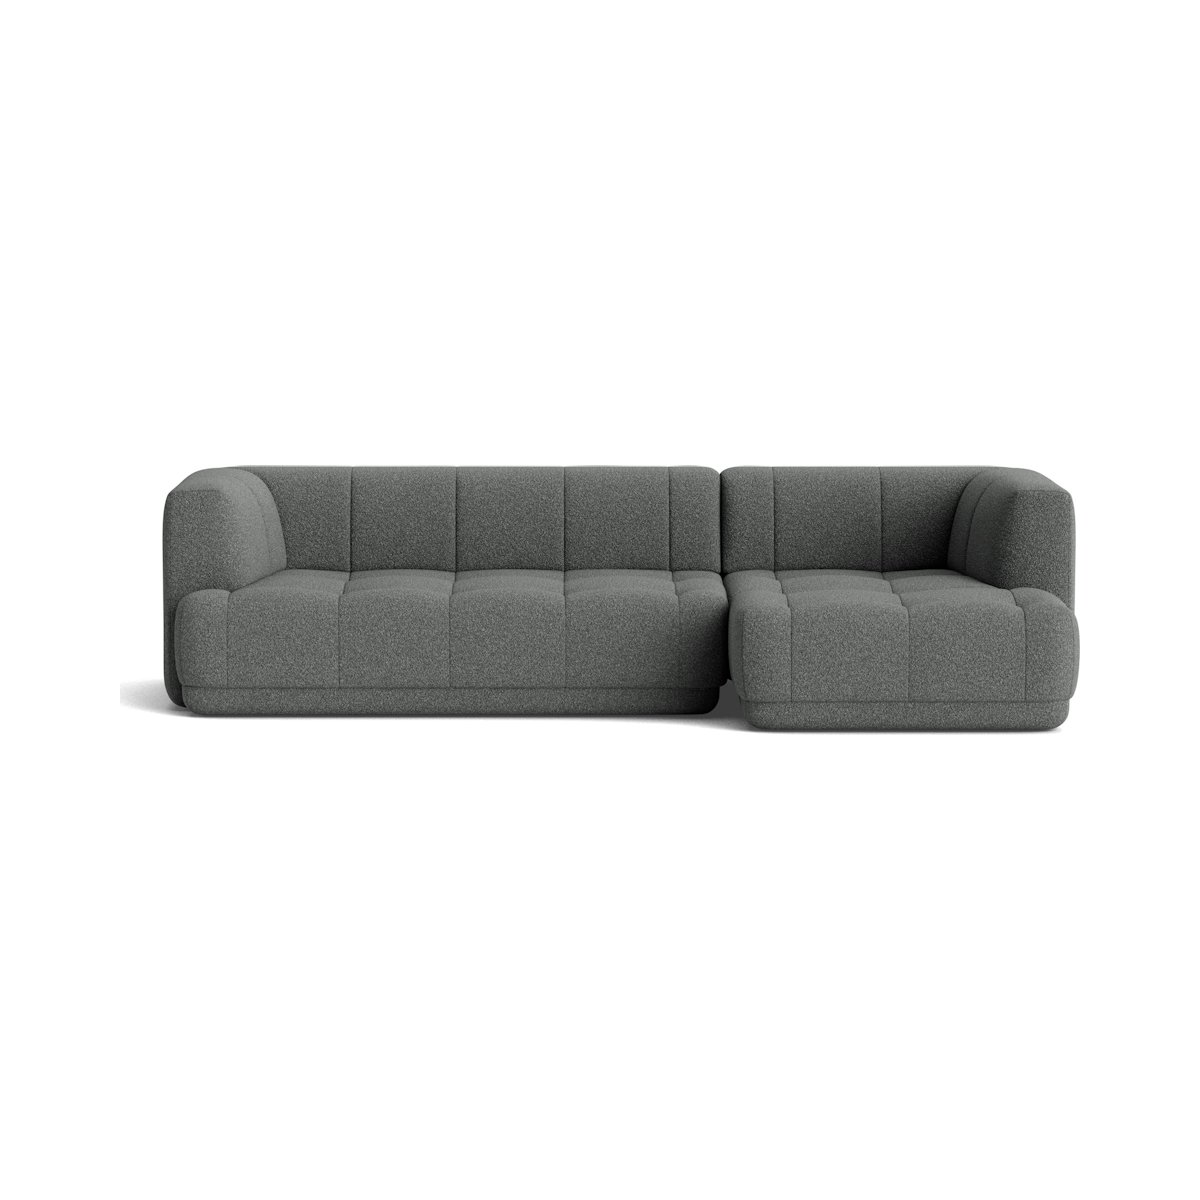 Quilton Sectional Chaise